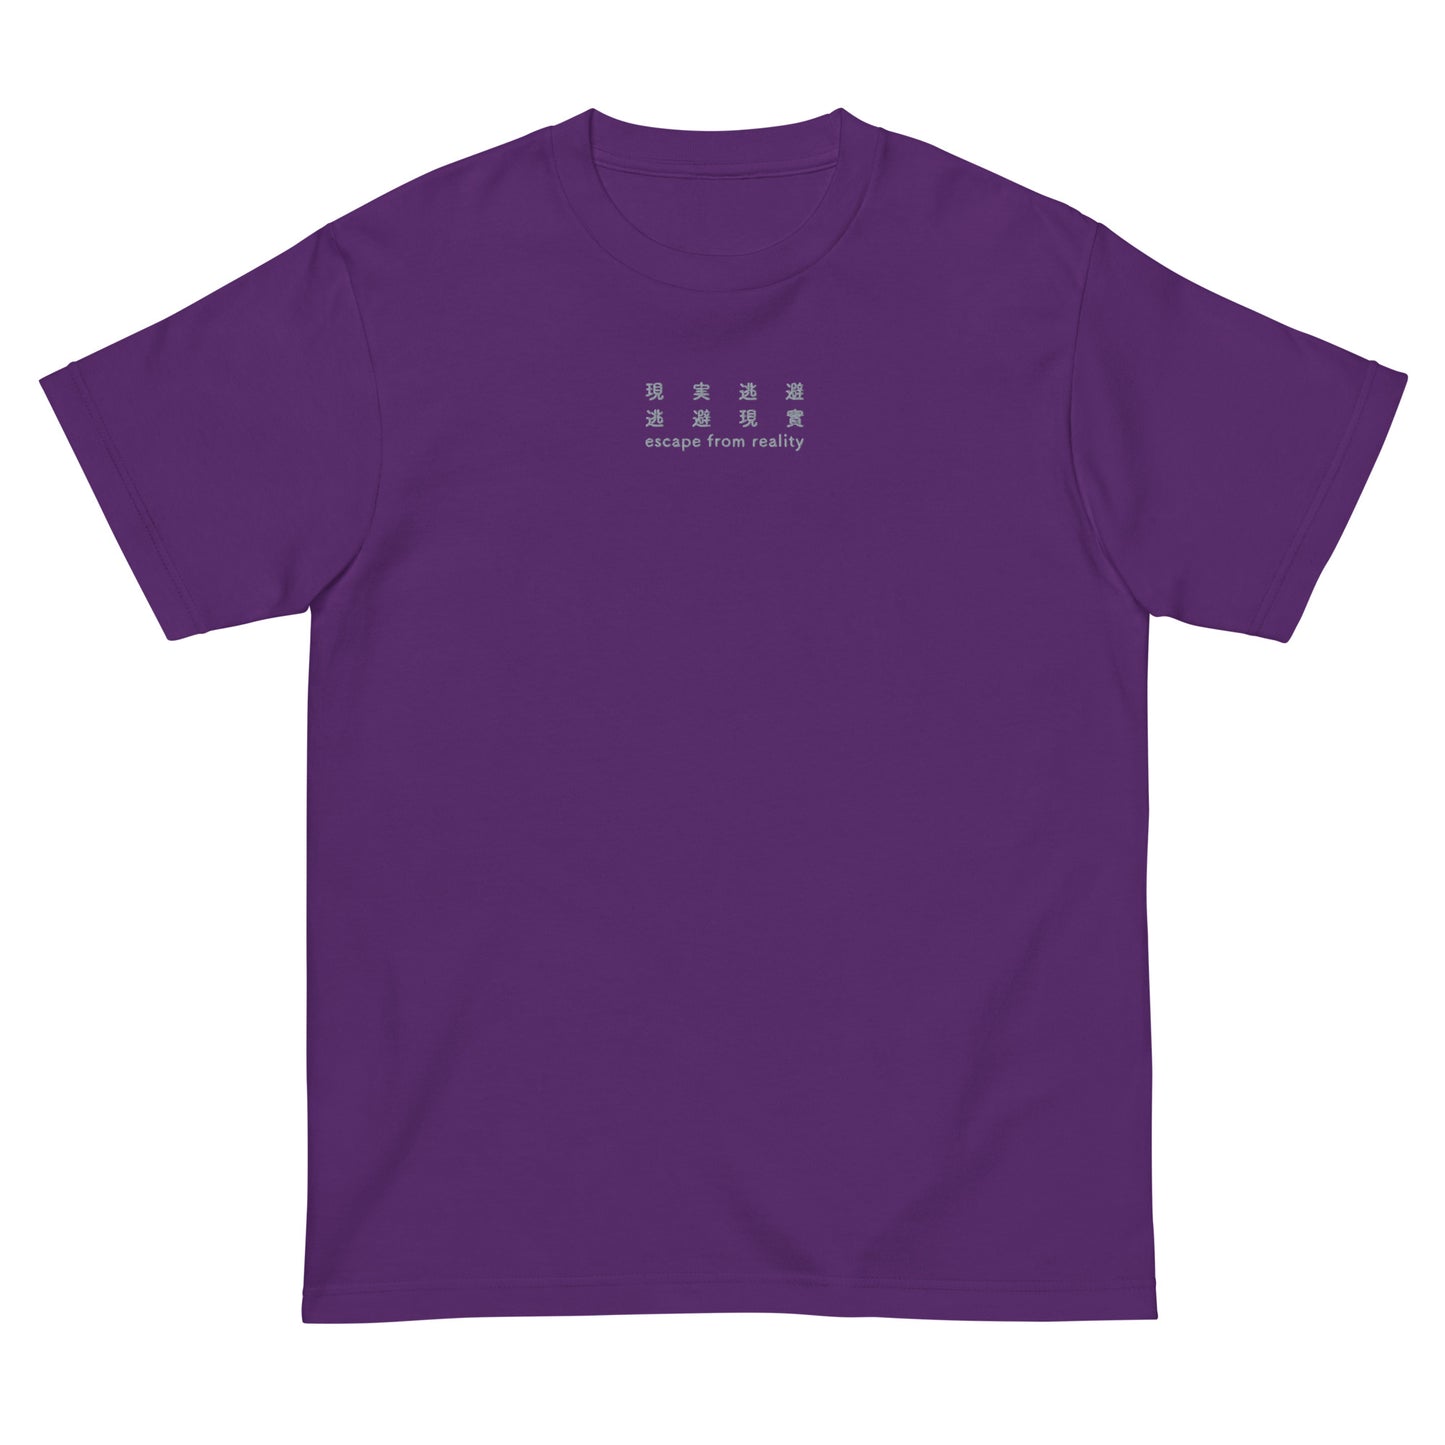 Purple High Quality Tee - Front Design with an Light Gray Embroidery "Escape From Reality" in Japanese,Chinese and English